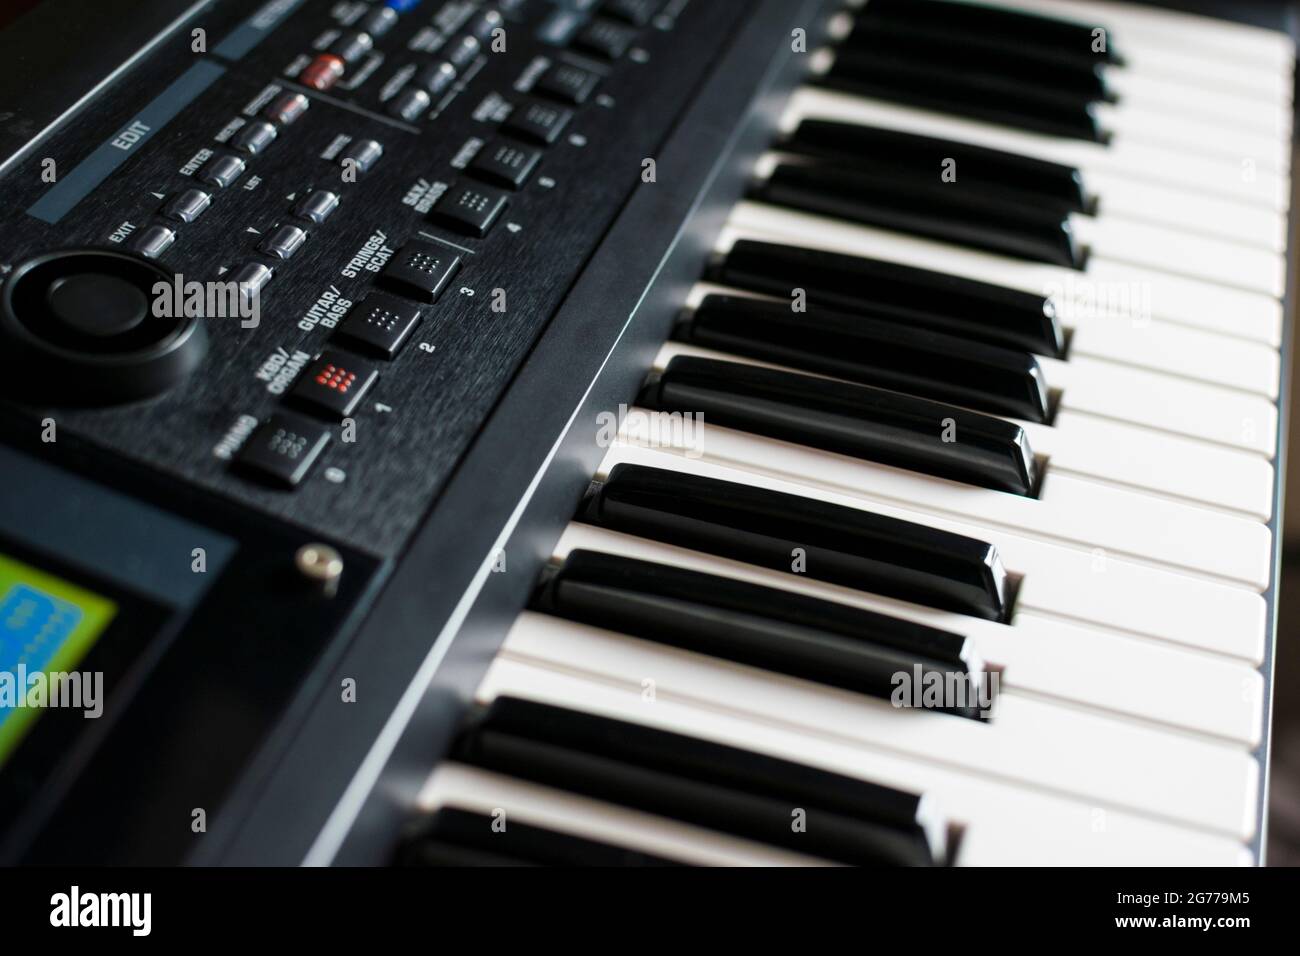 Closeup of keyboard synthesizer. Keys, buttons and knobs and the display of the instrument. Stock Photo